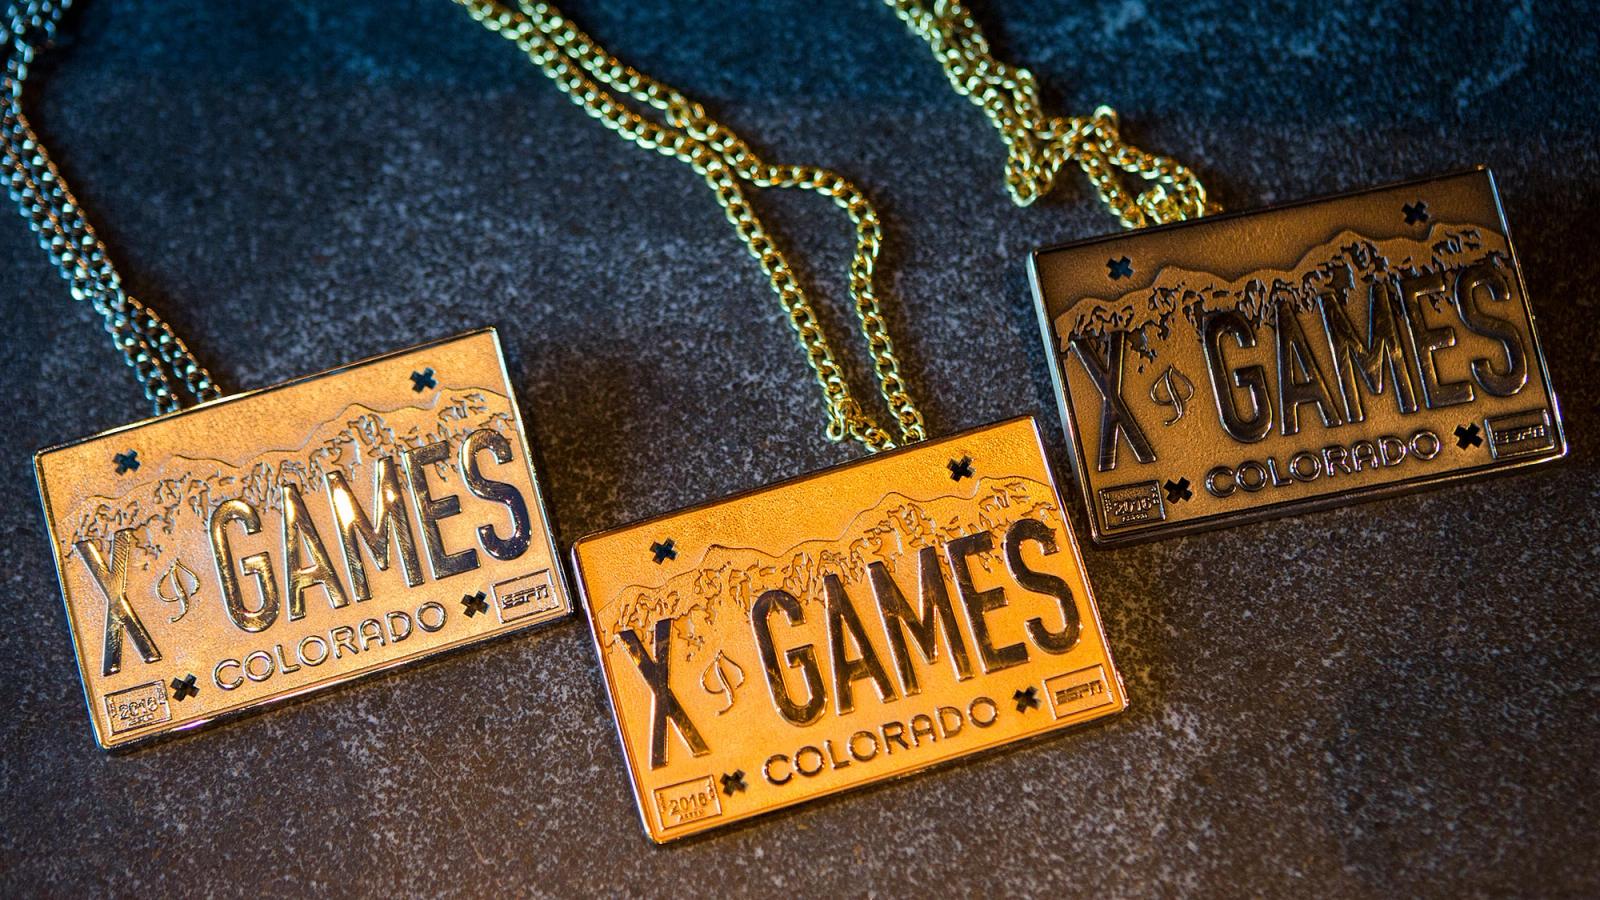 It's three necklaces earned from being in the X Games in Colorado. They're golden squares